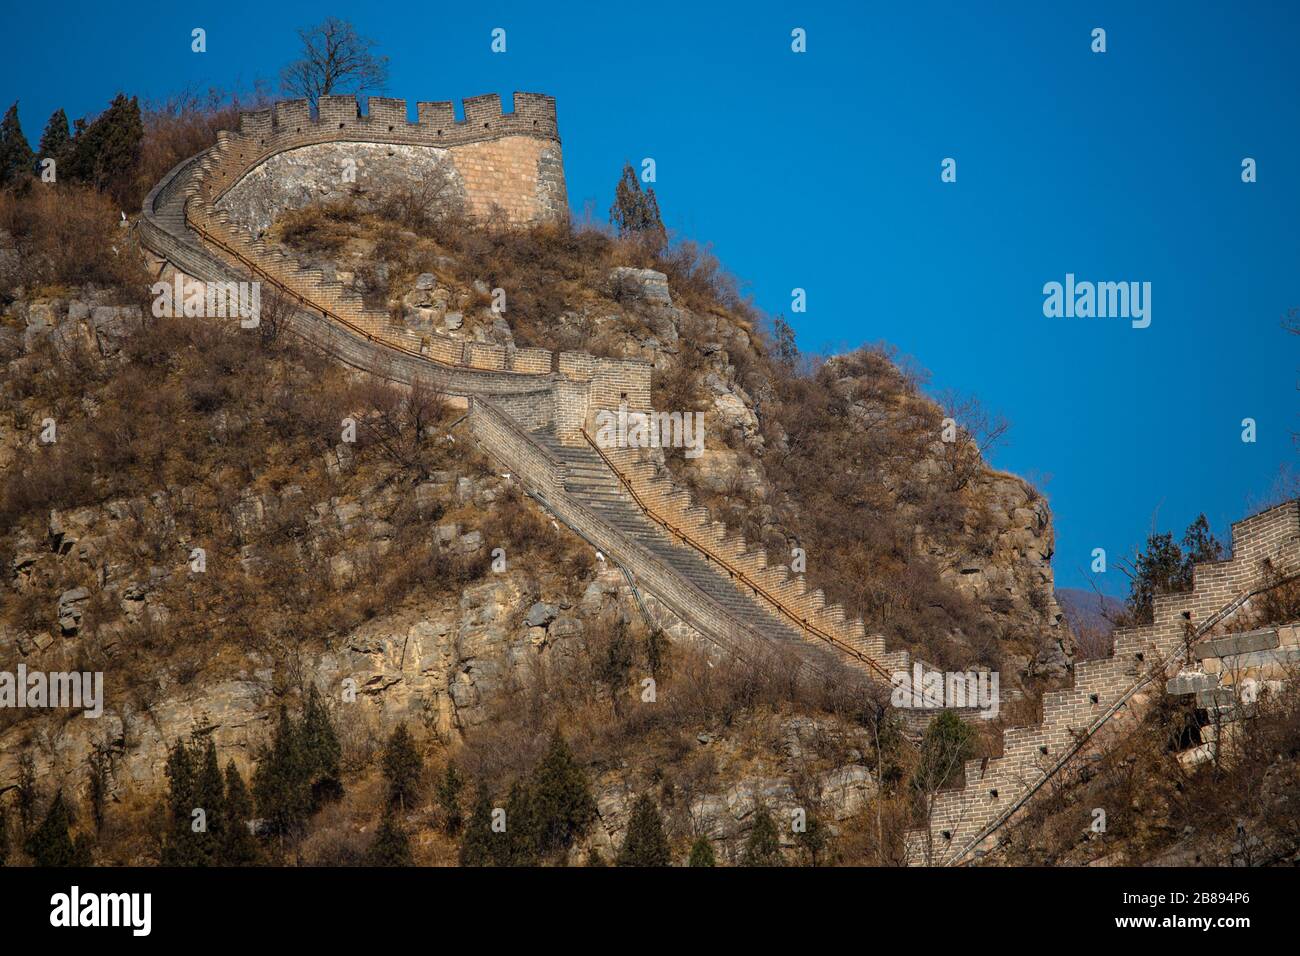 Sun sets on a blue sky day at the Great Wall of China, Beijing, China Stock Photo